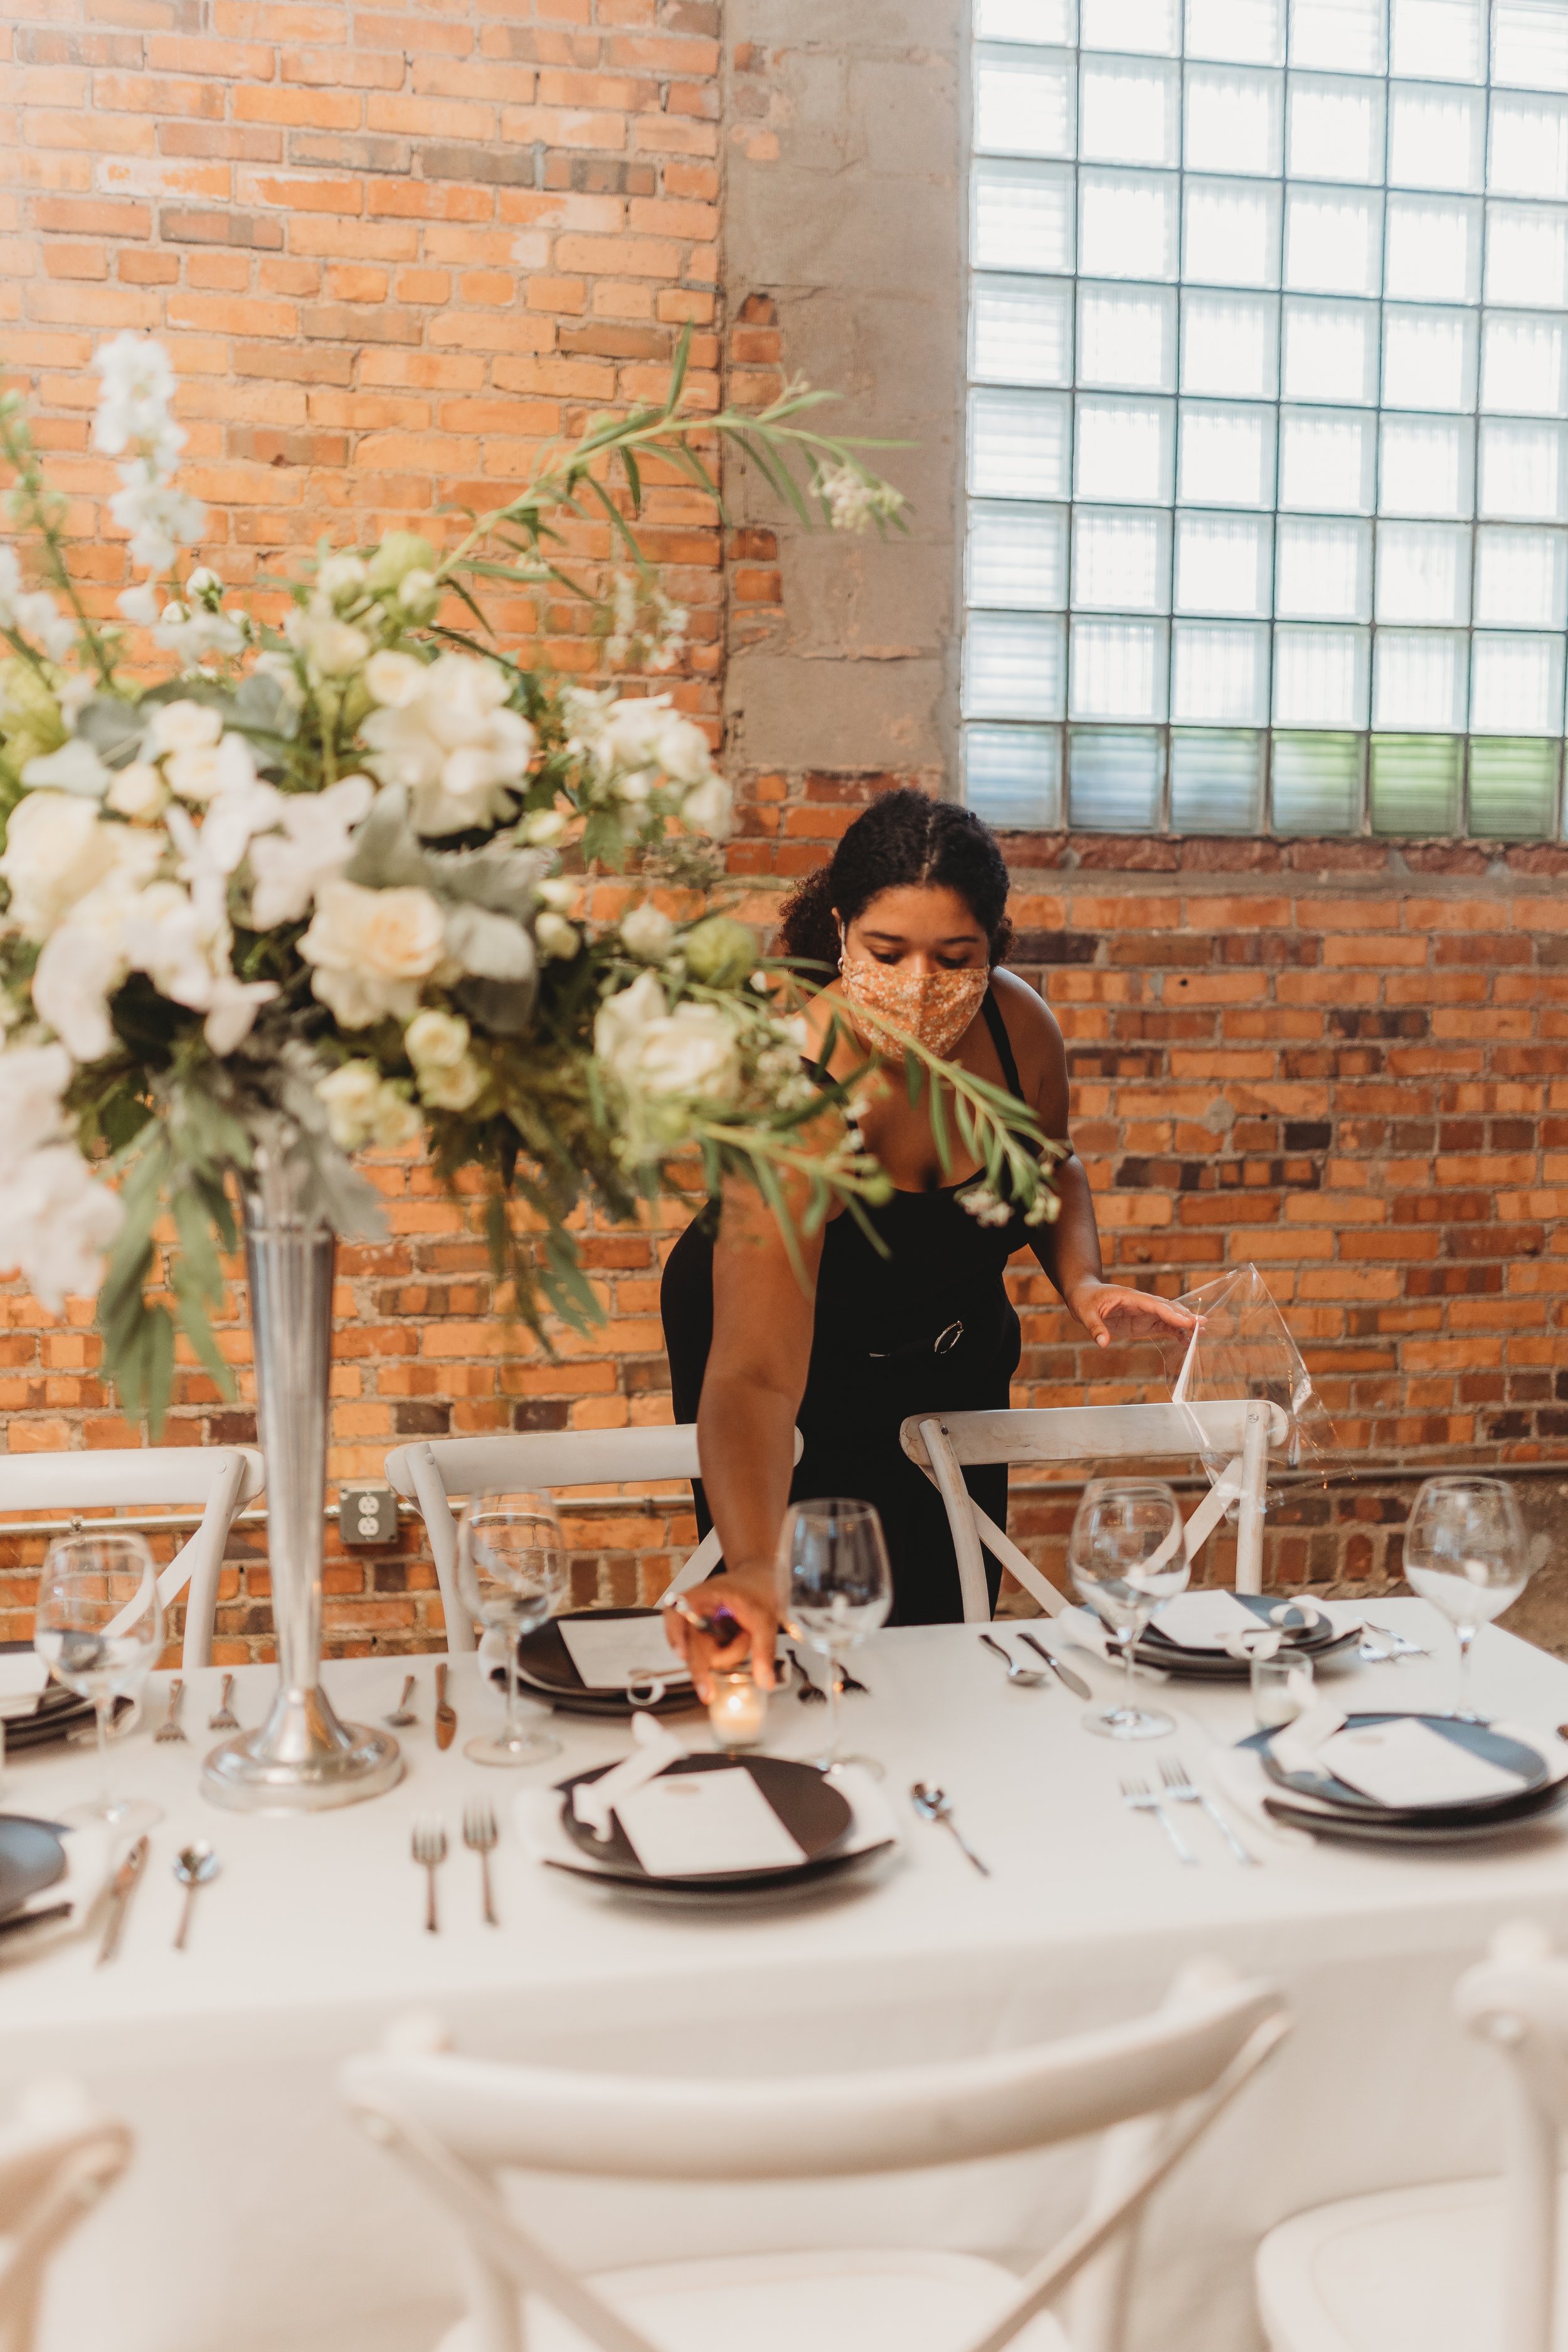 Sofi Melvin, Kansas City wedding planner, placing a lit tealight candle on a table with black and white decor and a large floral arrangement